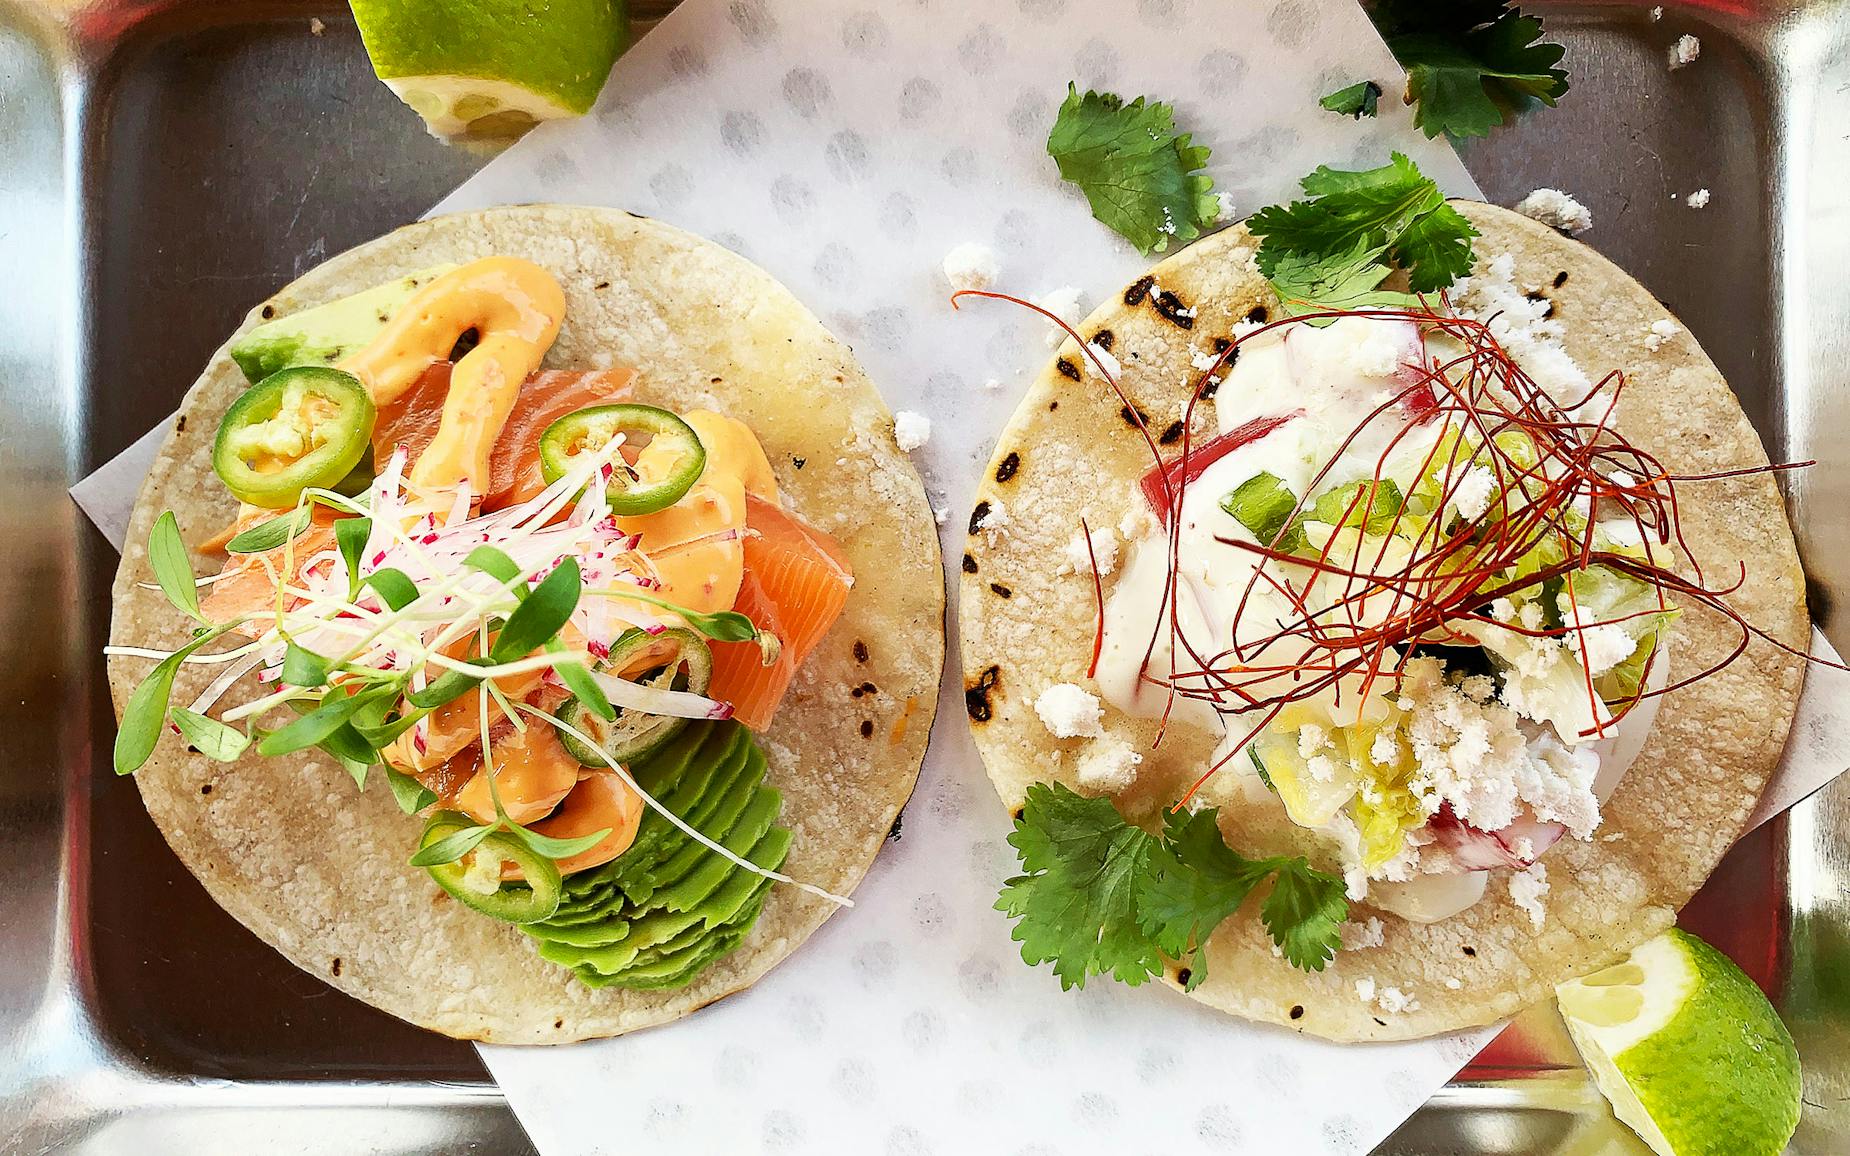 Edoko Omakase Sets the Standard for Japanese-Style Tacos in Texas